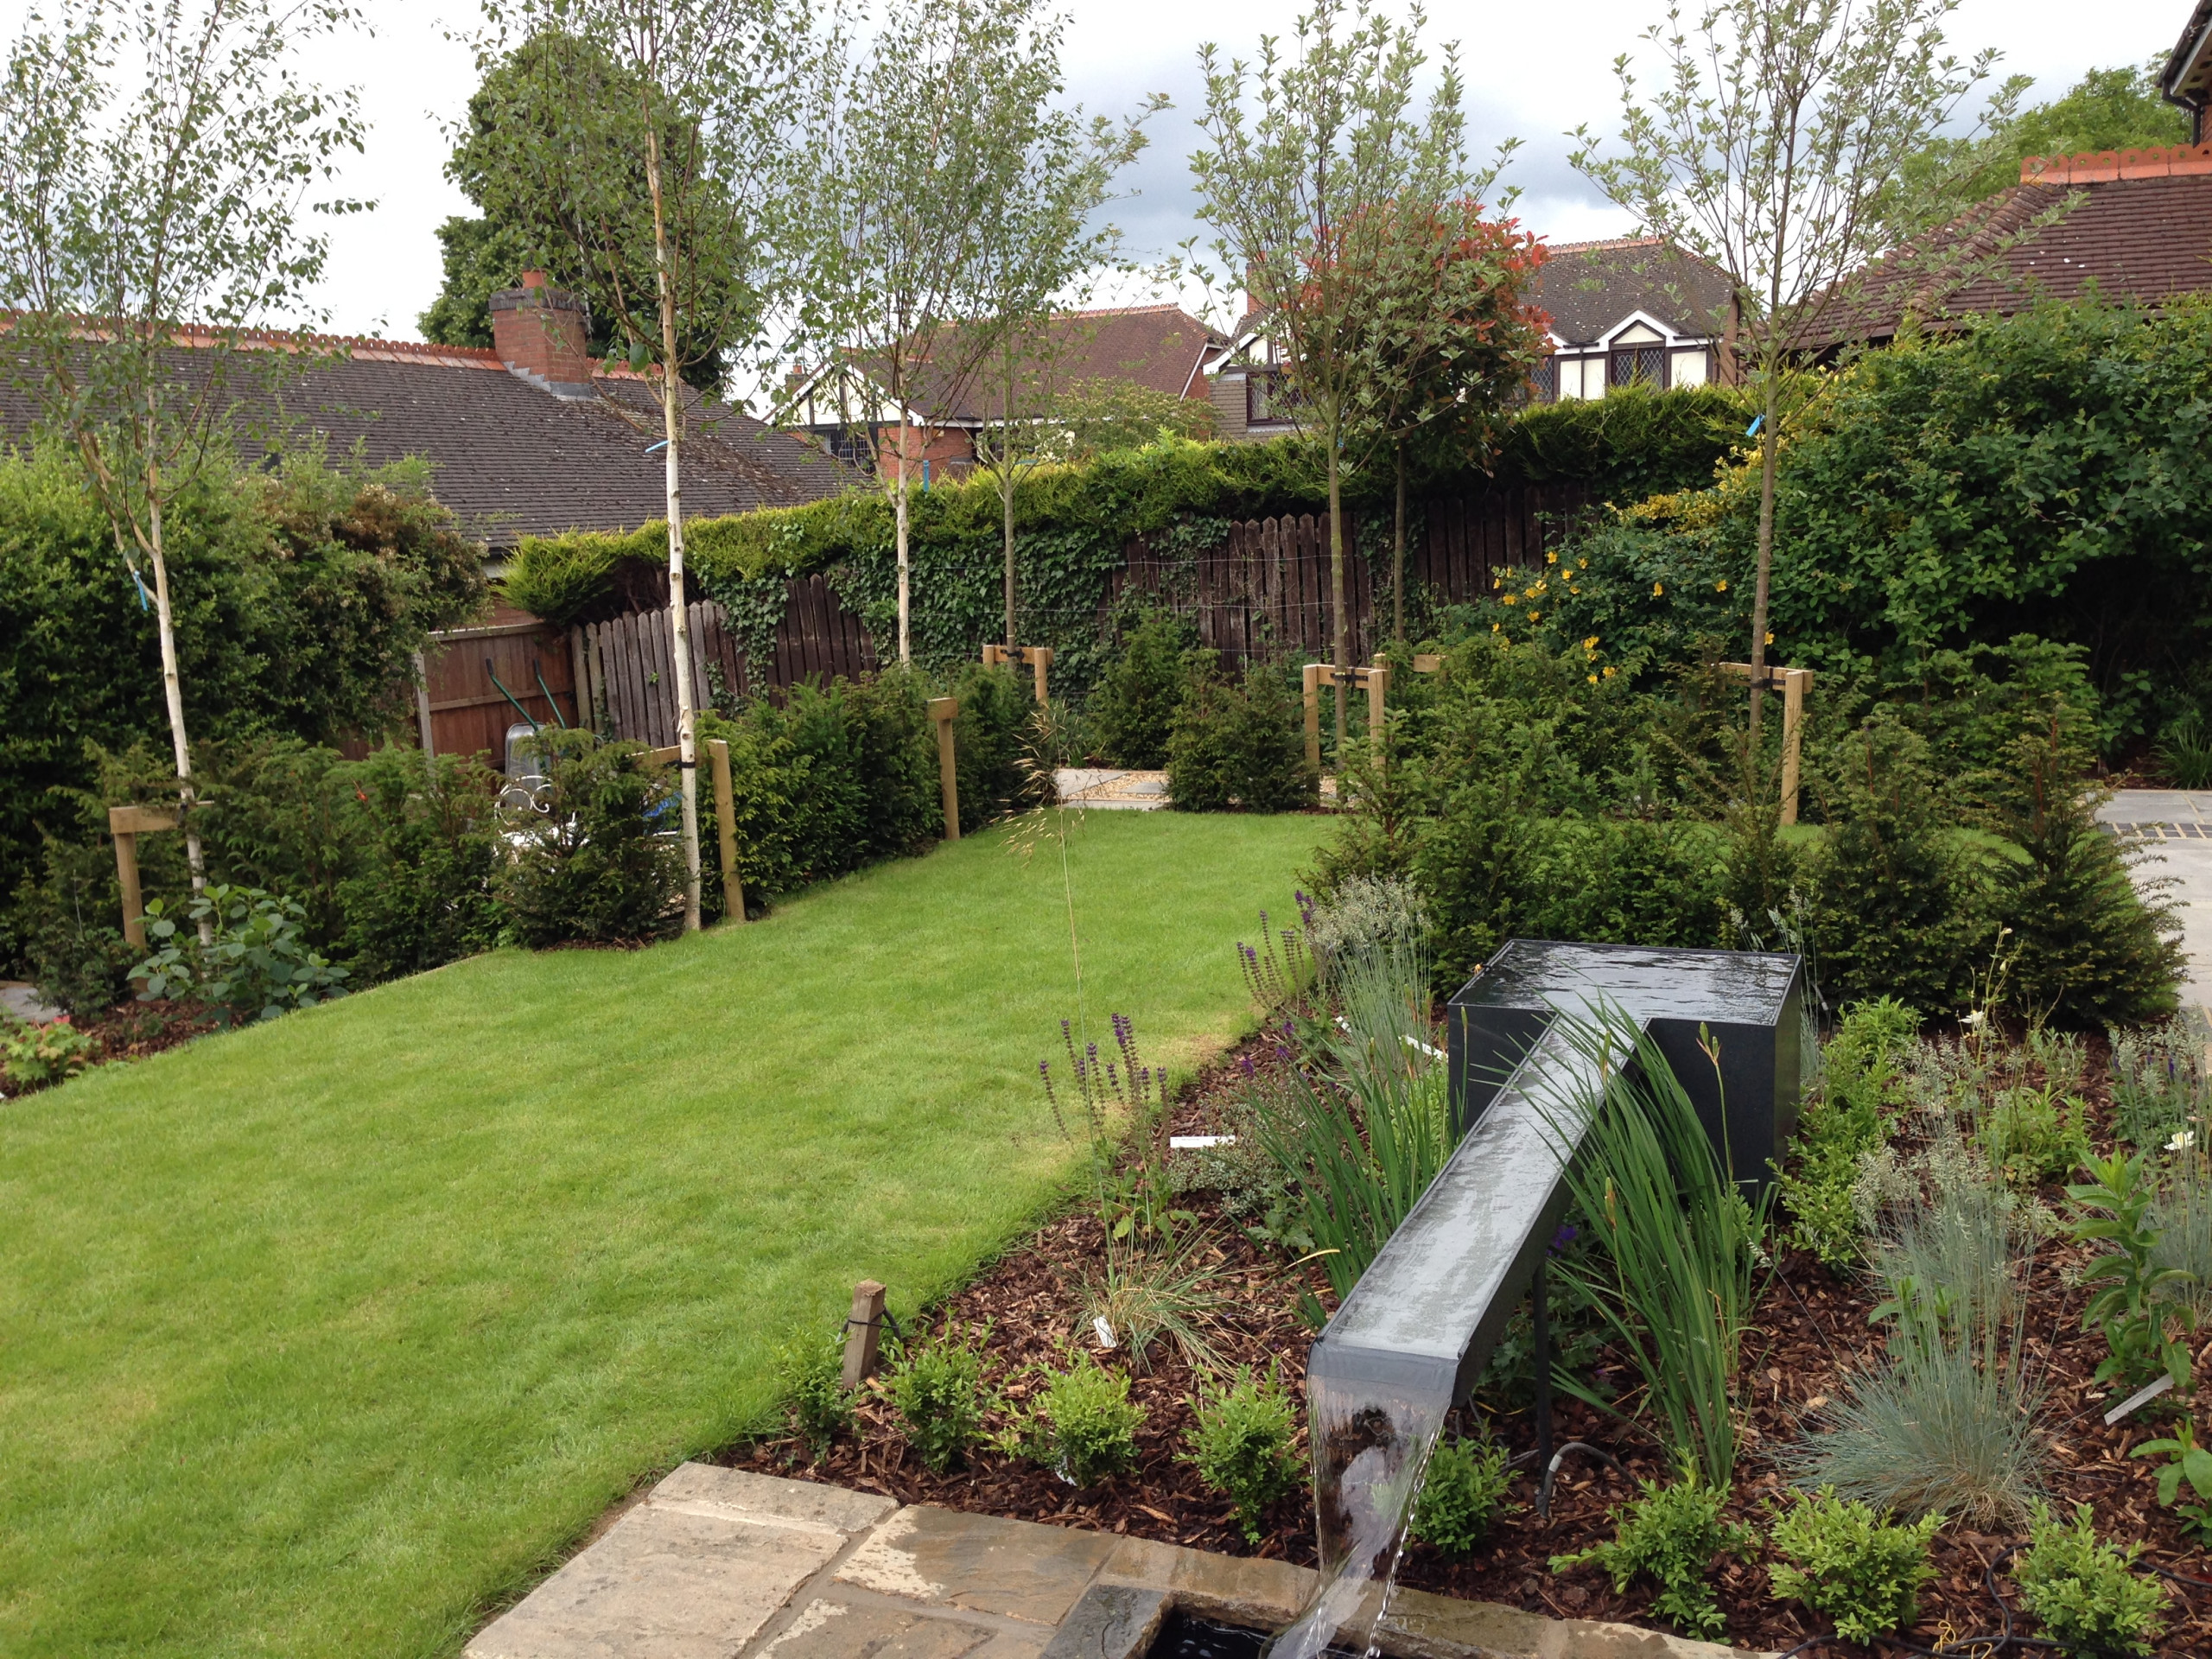 Garden with Focal Water Feature